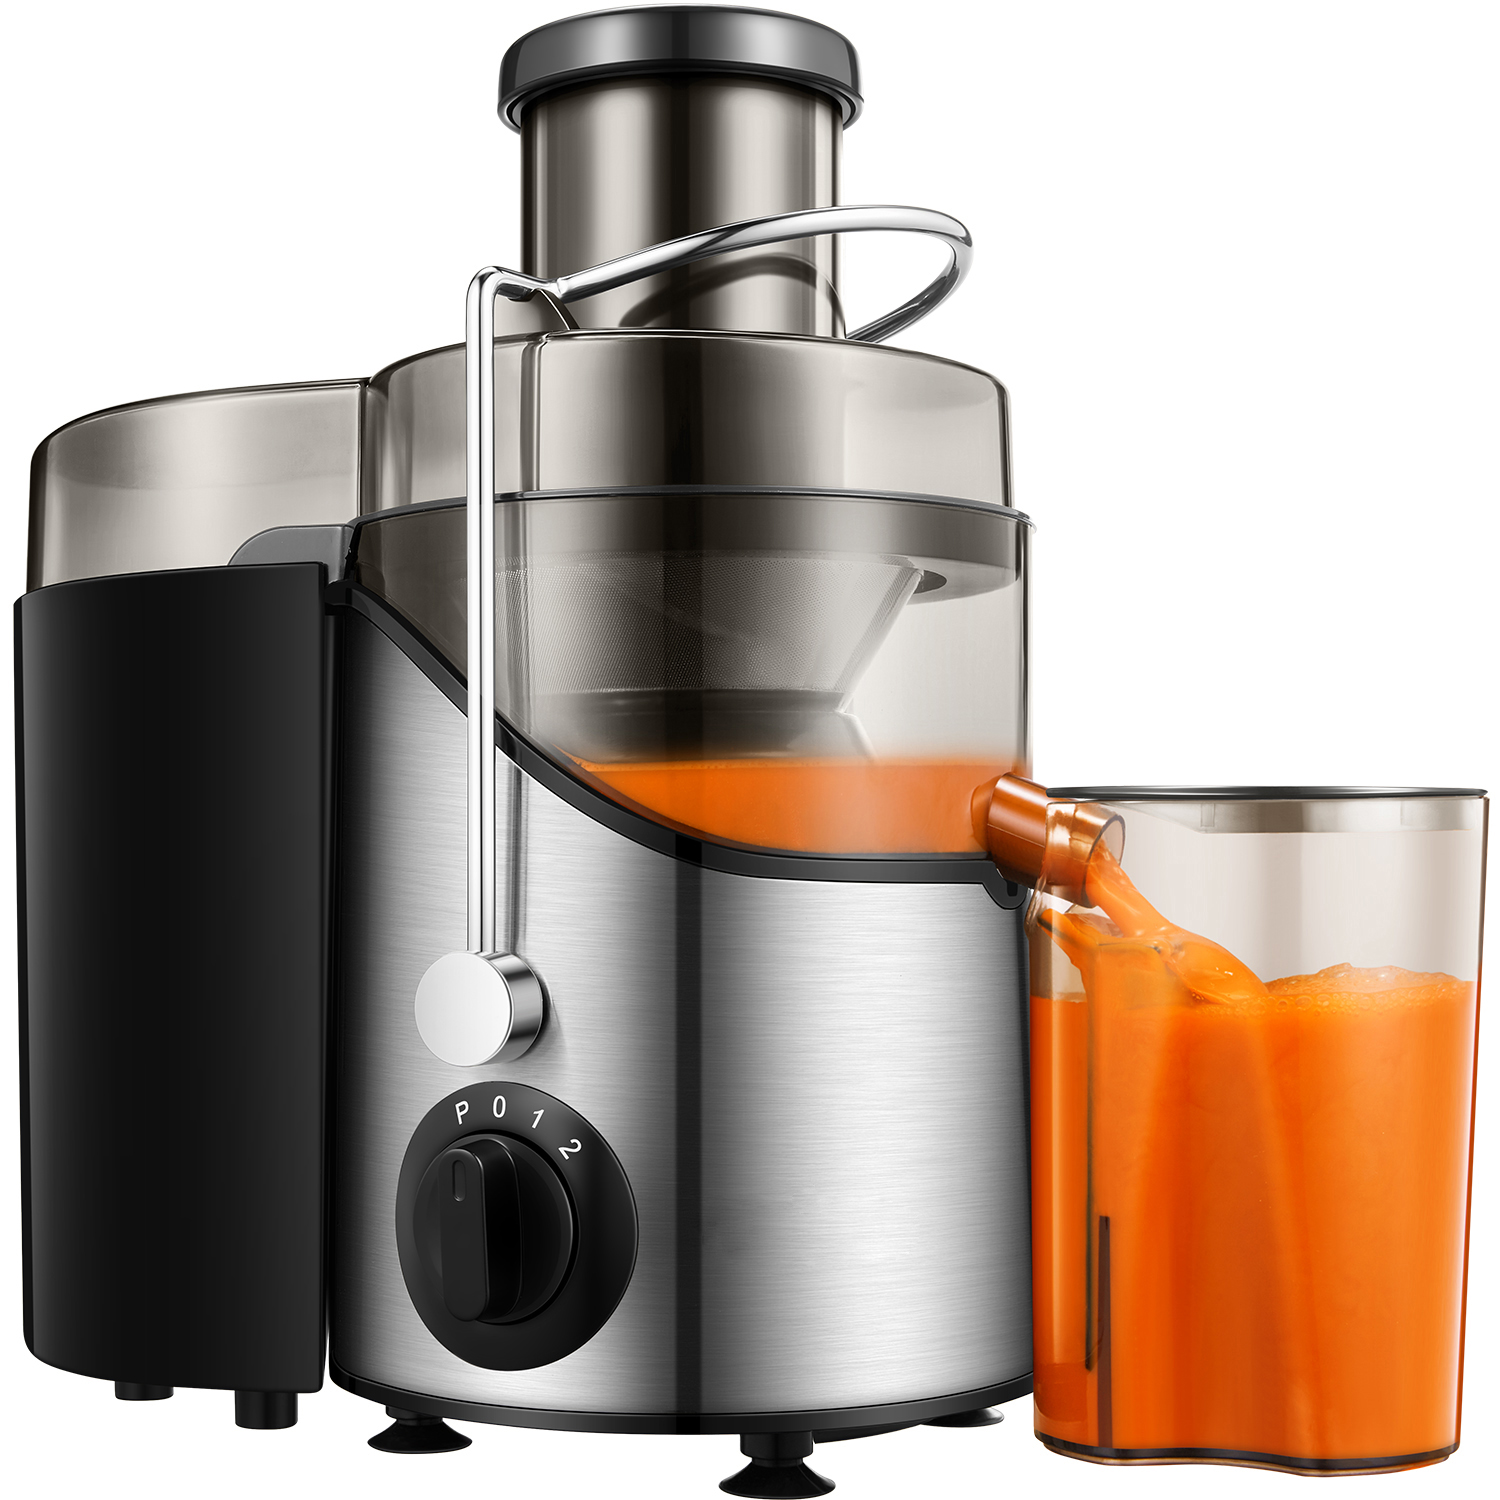 Juicer Extractor Easy Clean, 3 Speeds Control, Stainless Steel BPA Free - image 1 of 9